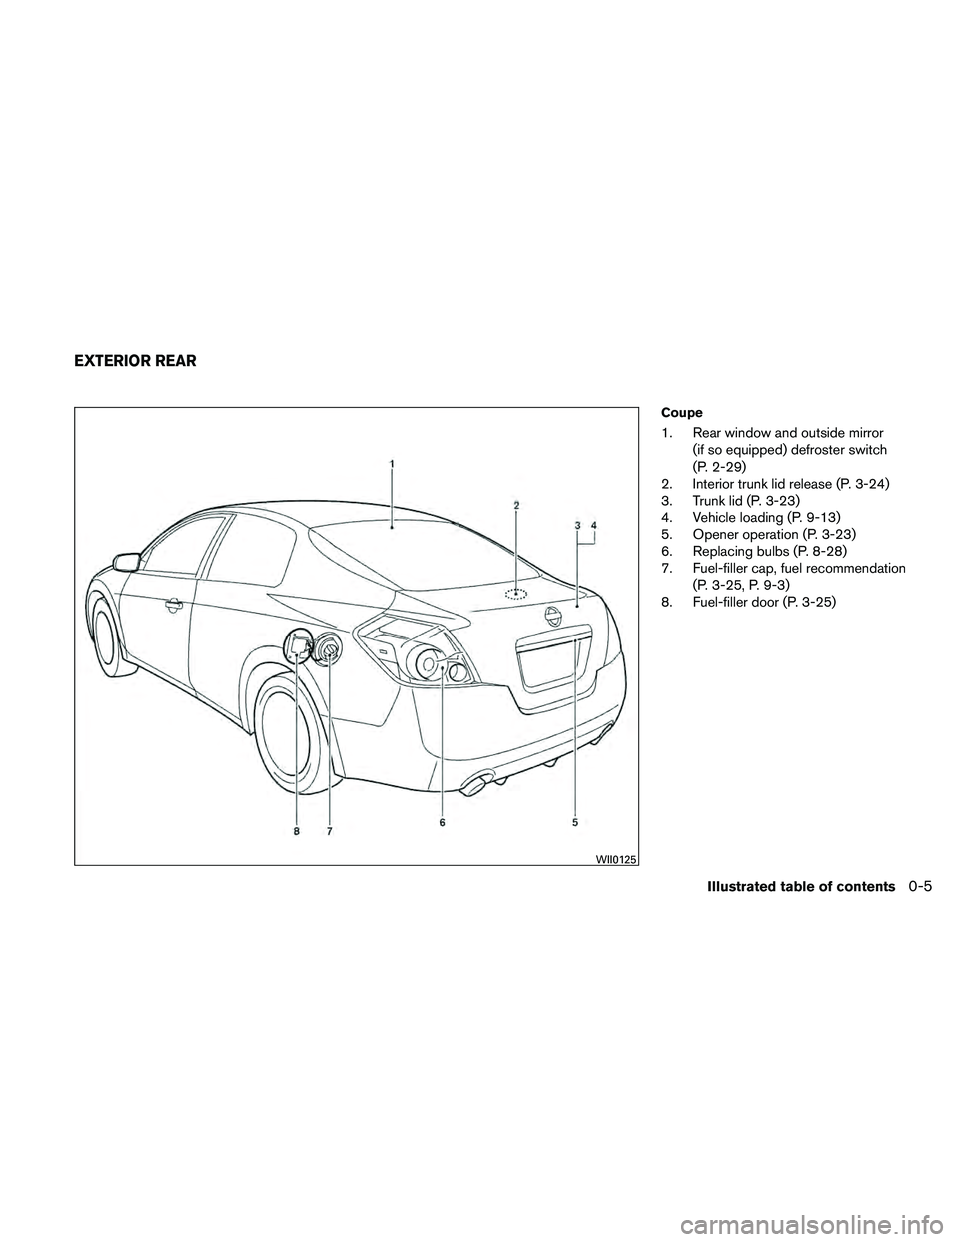 NISSAN ALTIMA 2011  Owners Manual Coupe
1. Rear window and outside mirror(if so equipped) defroster switch
(P. 2-29)
2. Interior trunk lid release (P. 3-24)
3. Trunk lid (P. 3-23)
4. Vehicle loading (P. 9-13)
5. Opener operation (P. 3